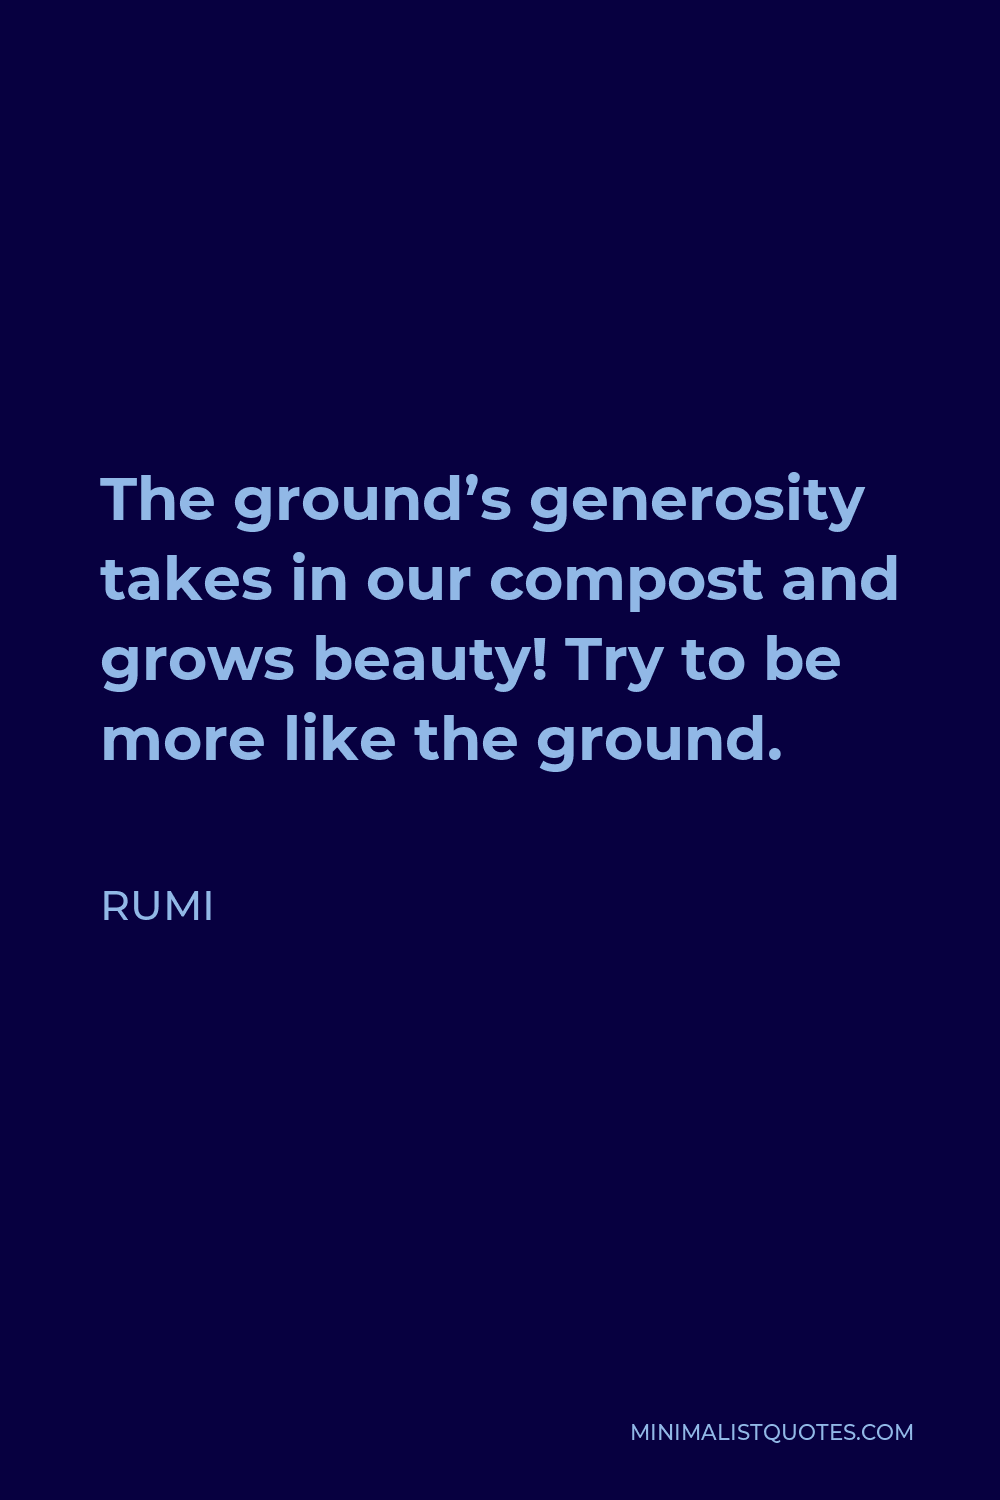 Rumi Quote - The ground’s generosity takes in our compost and grows beauty! Try to be more like the ground.